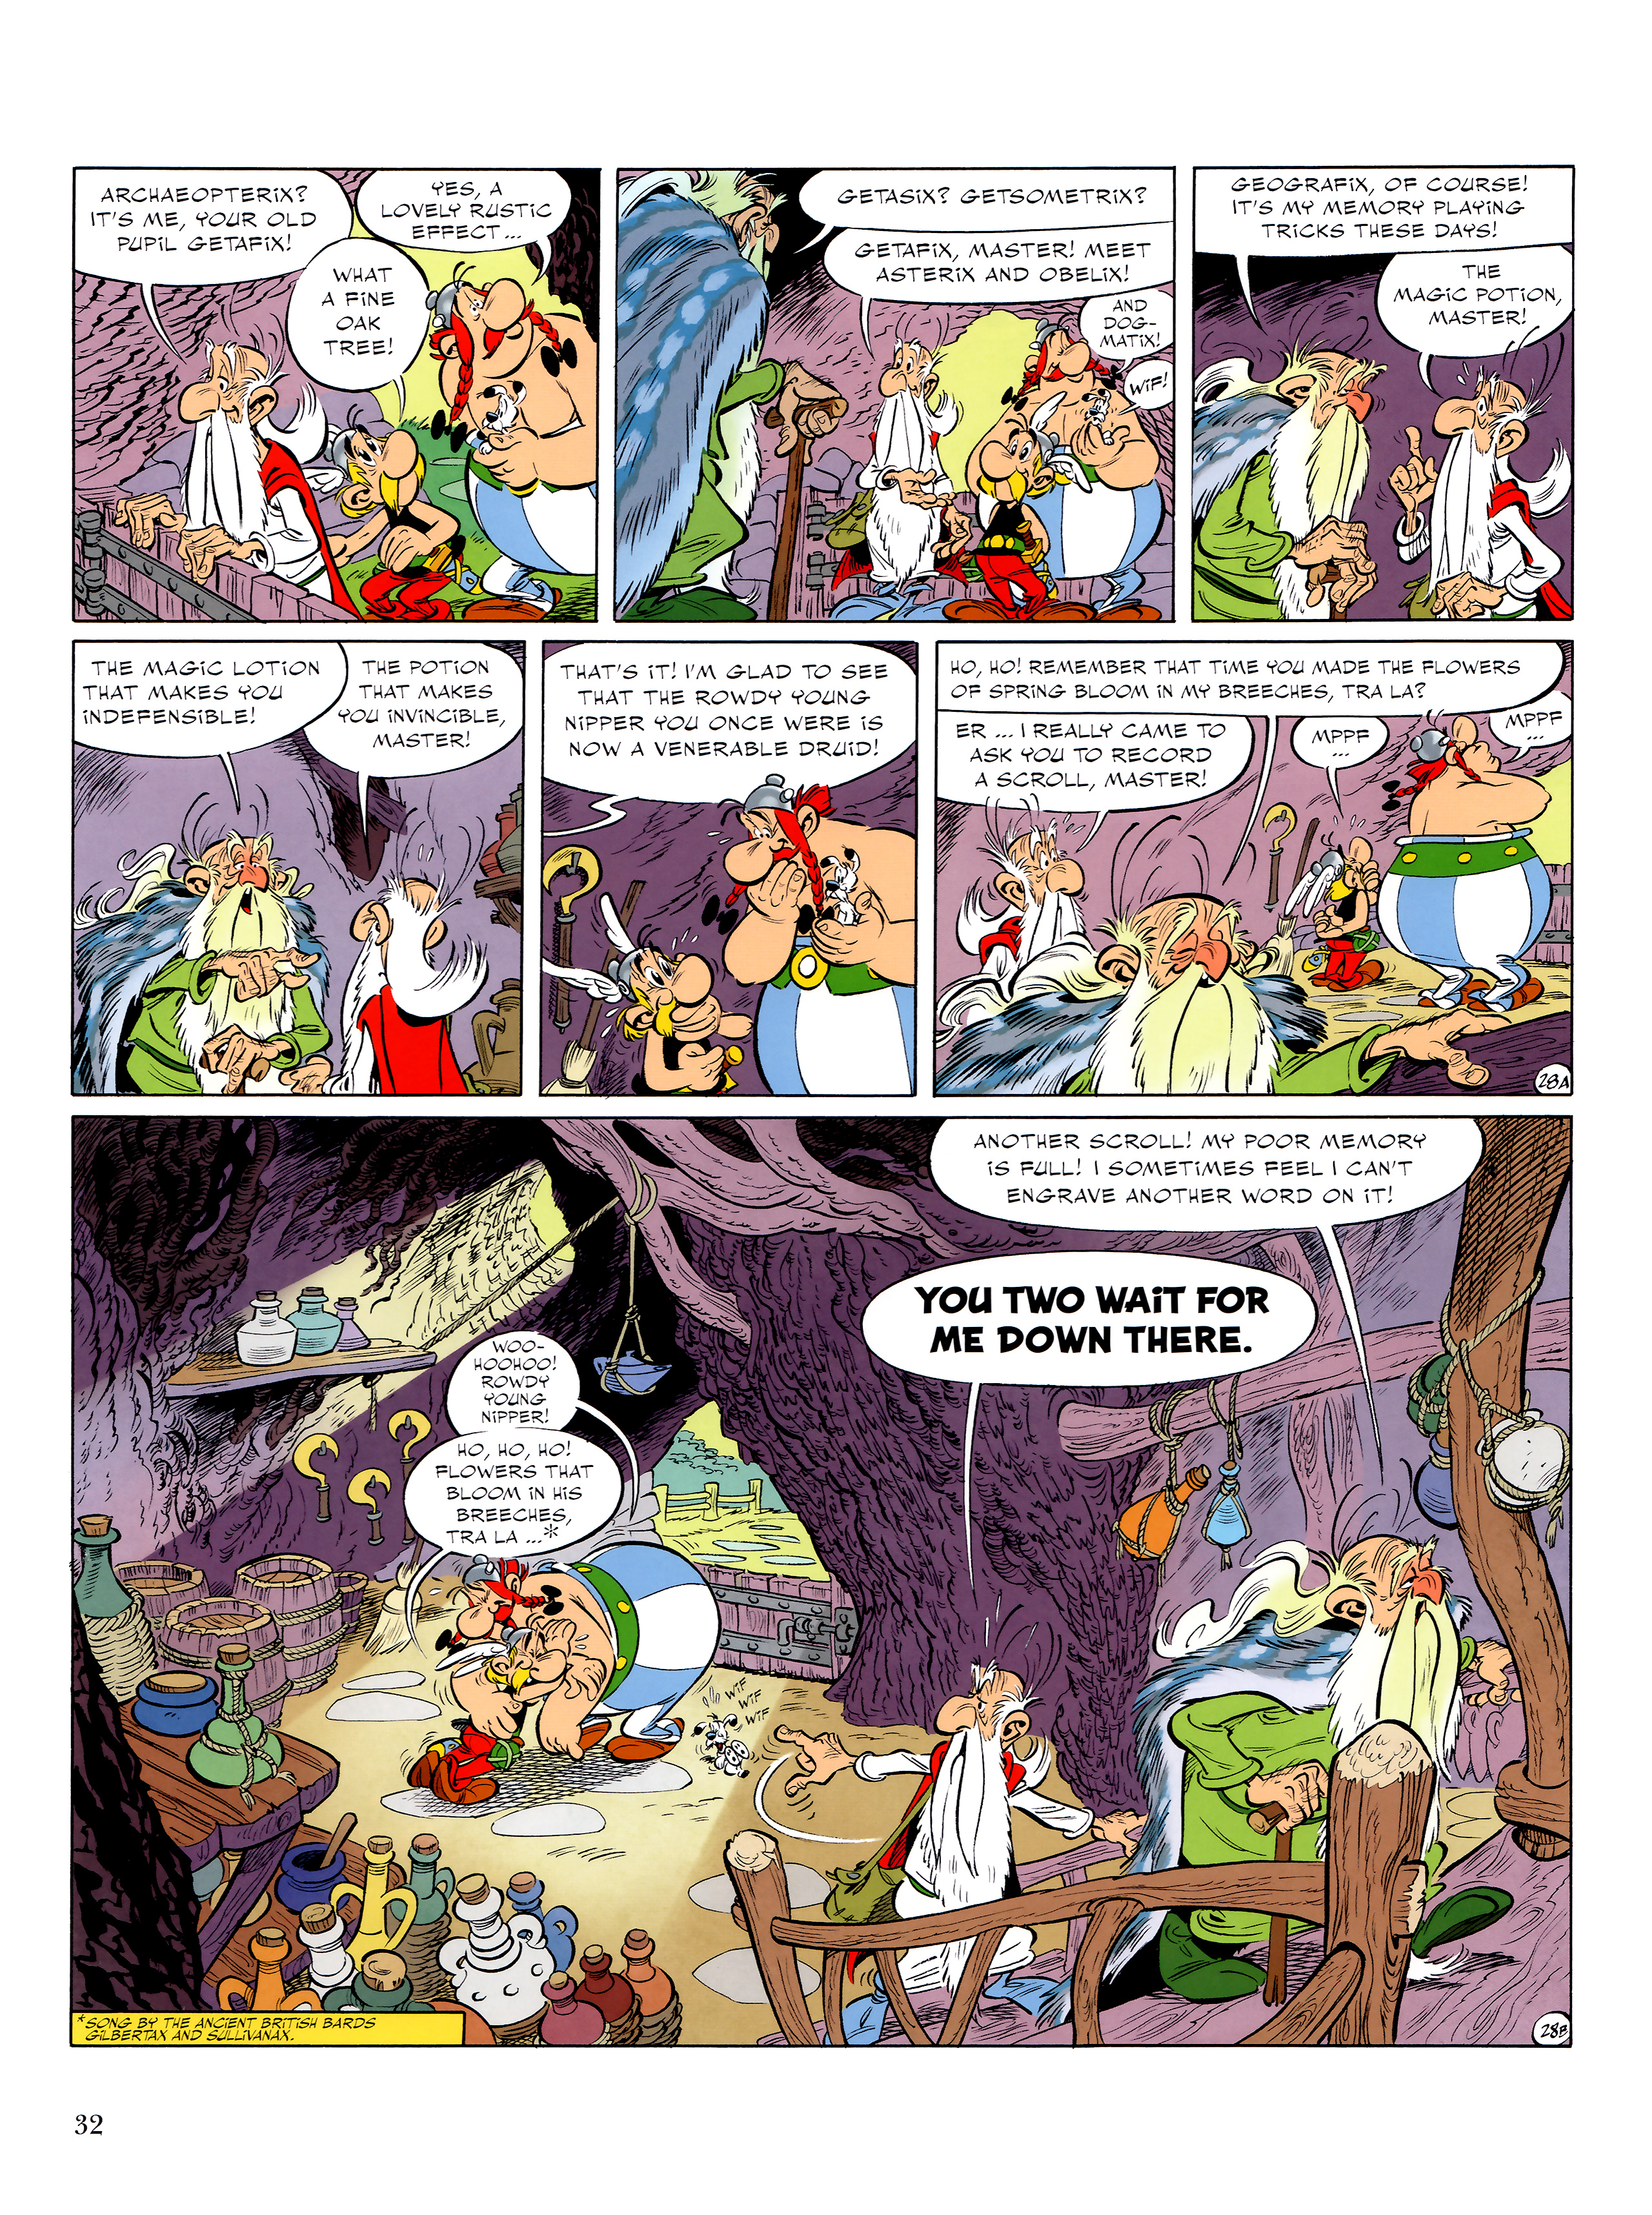 Read online Asterix comic -  Issue #36 - 33